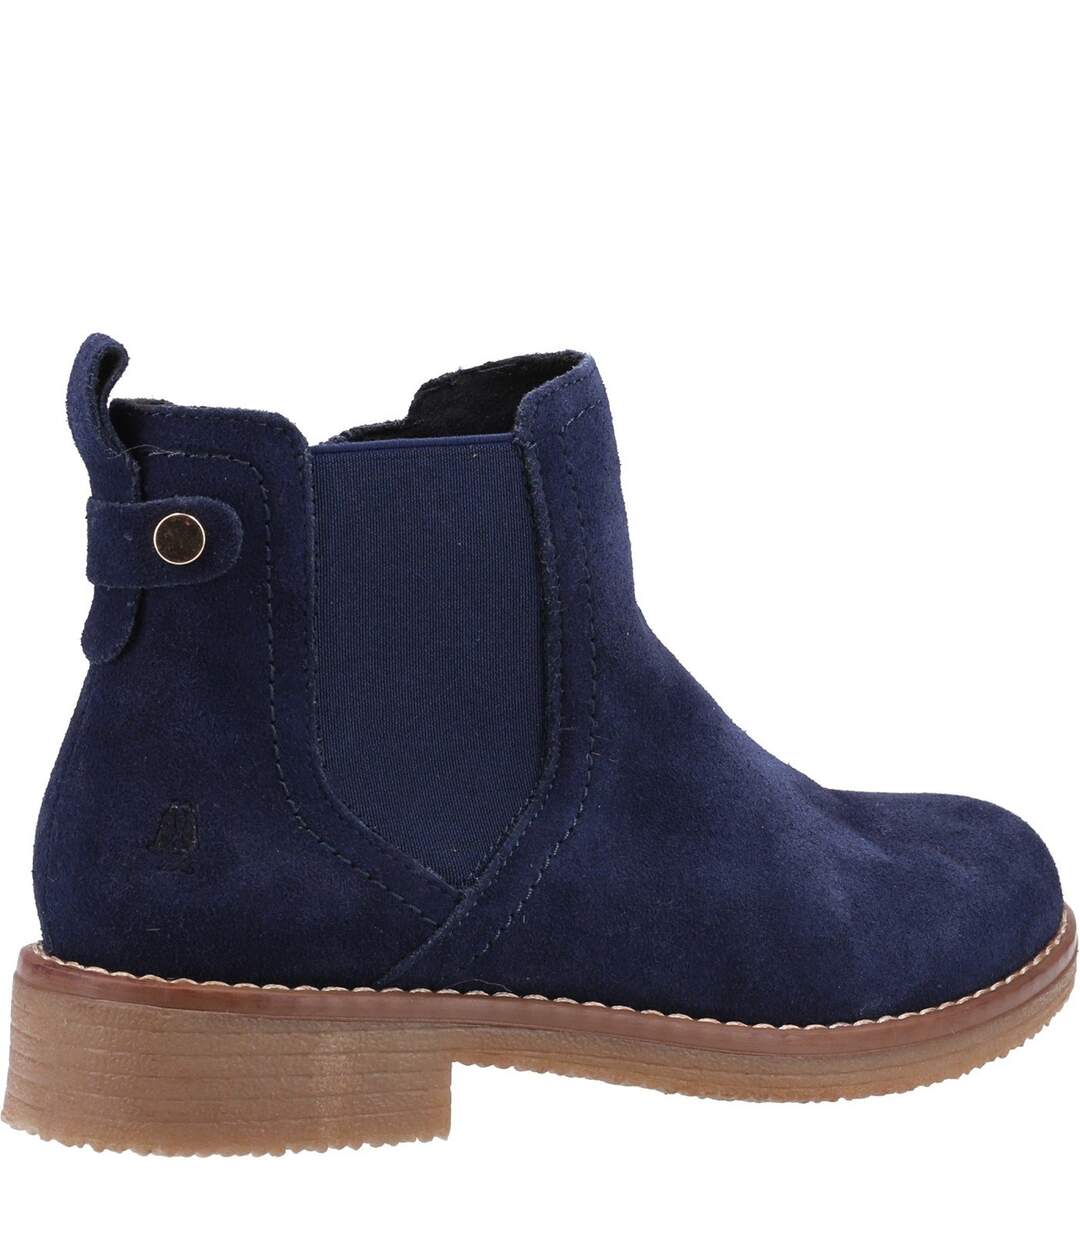 Hush Puppies Womens/Ladies Maddy Suede Ankle Boots (Navy) - UTFS8305